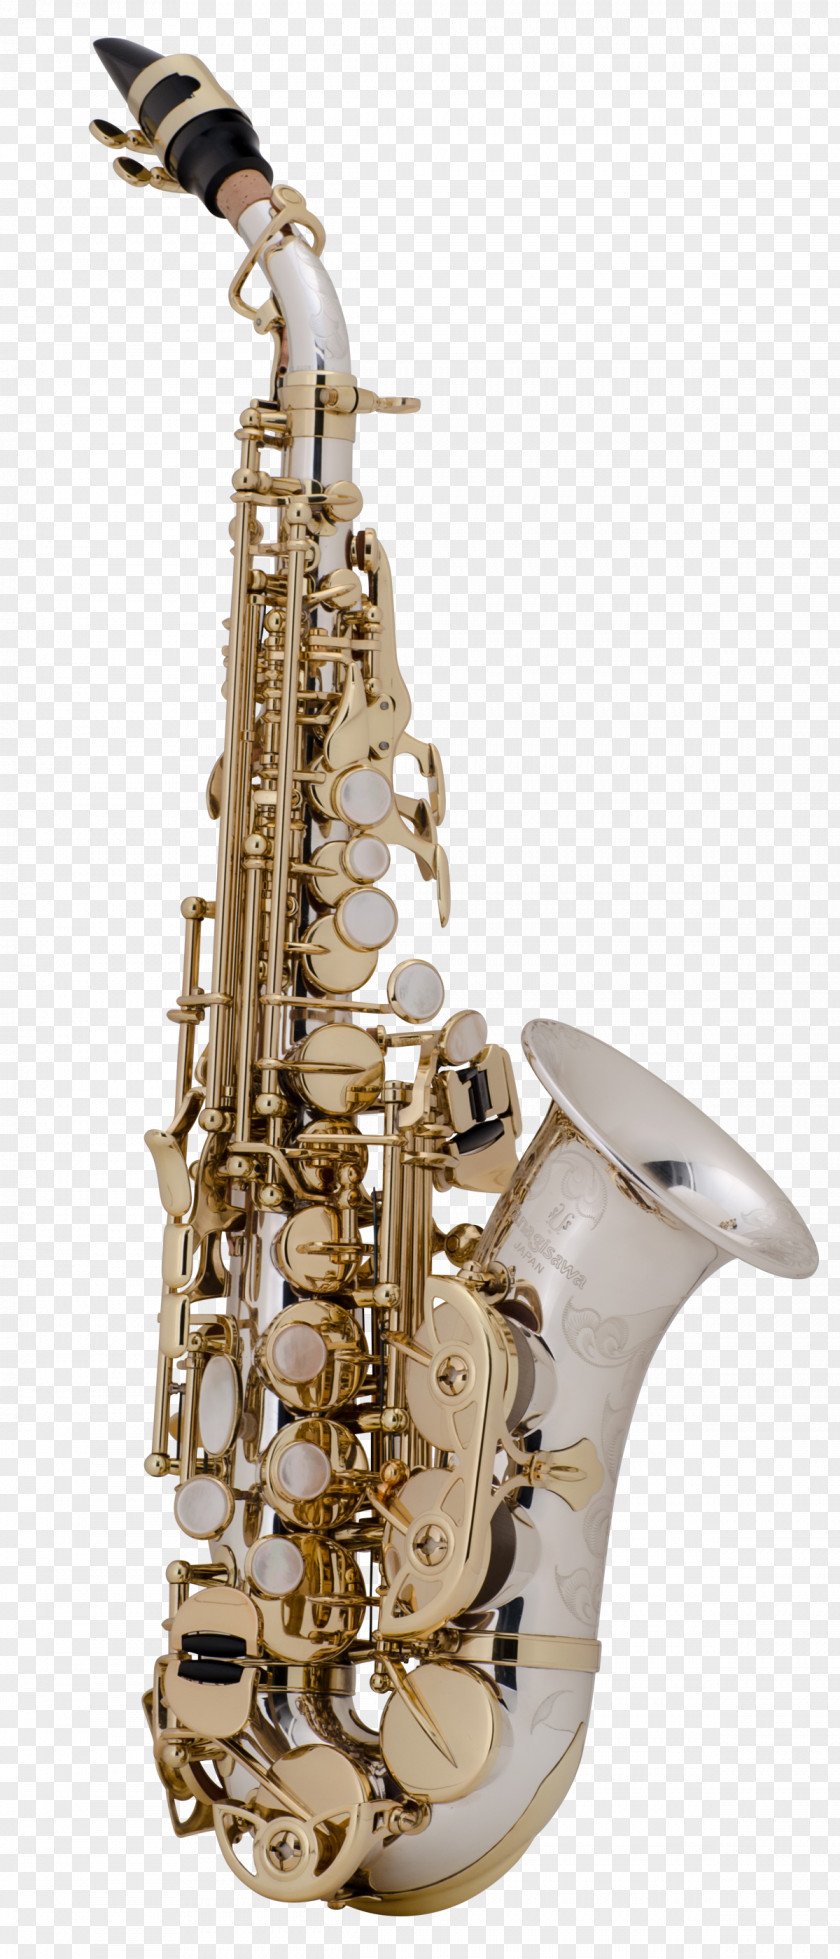 Saxophone Baritone Musical Instruments Woodwind Instrument Brass PNG